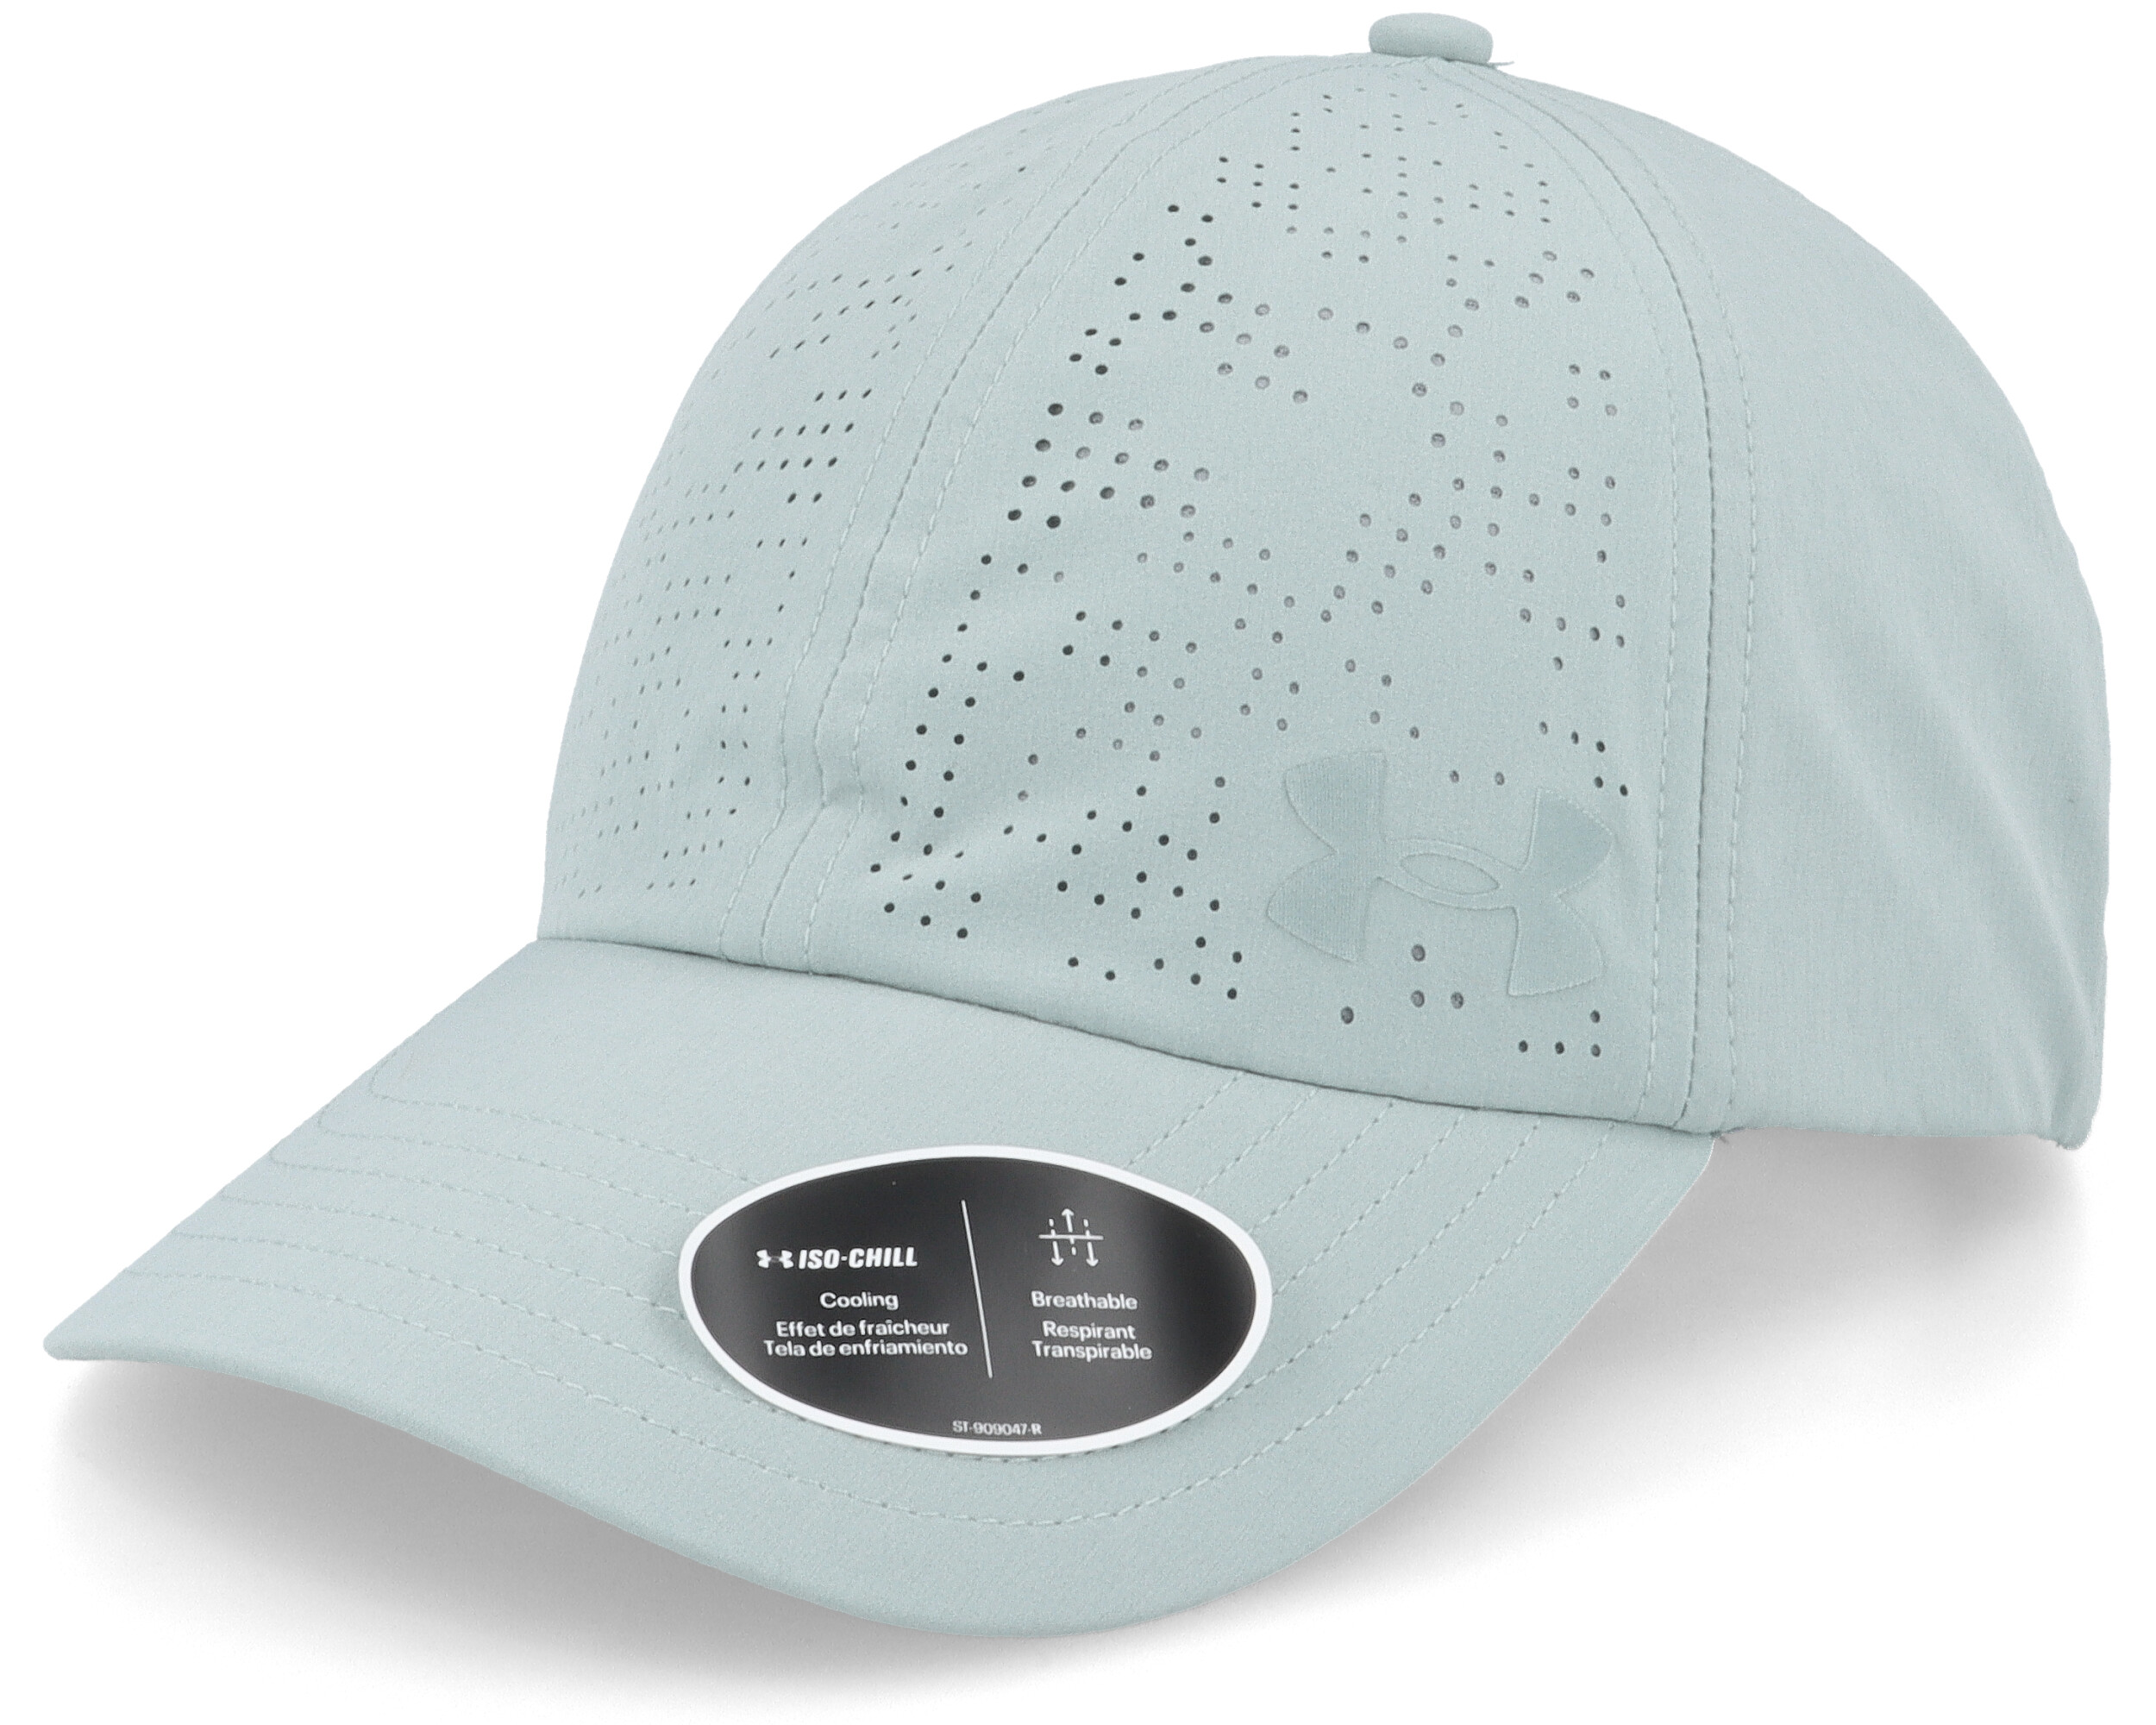 Iso-chill Breathe Opal Green/Illusion Green Dad Cap - Under Armour